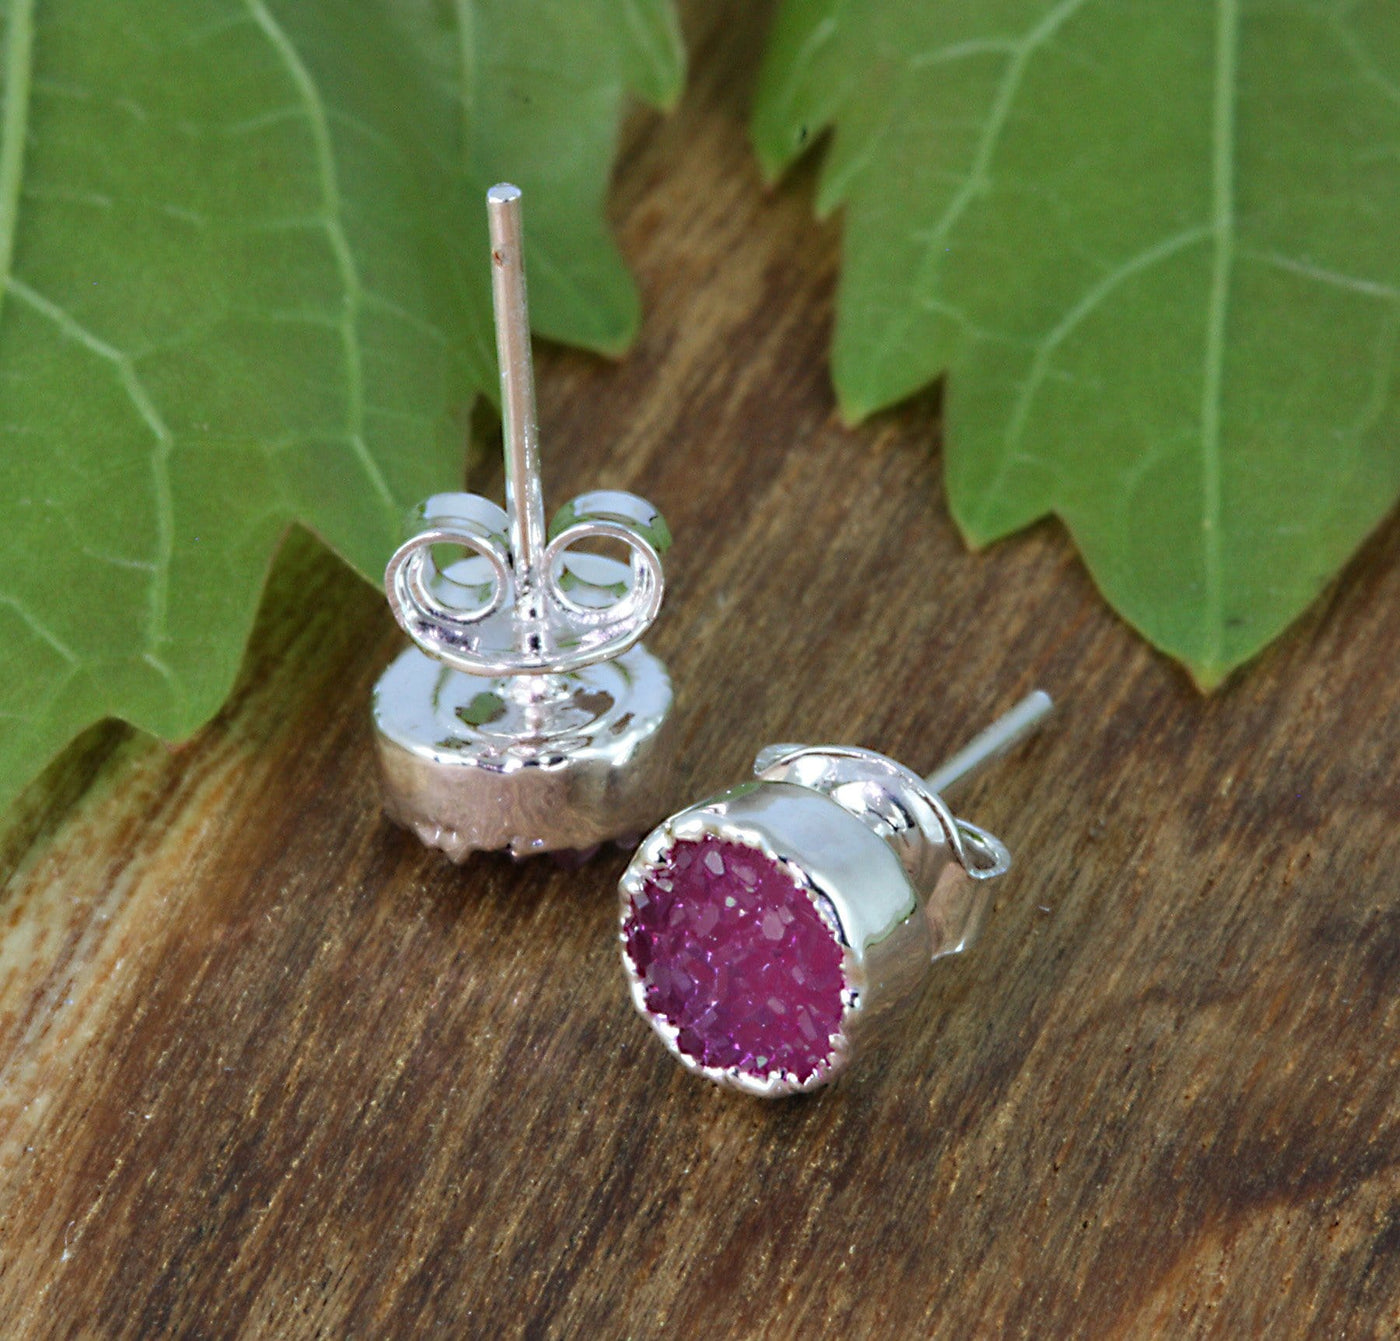 Tiny Round Pink Druzy Stud Earrings in silver